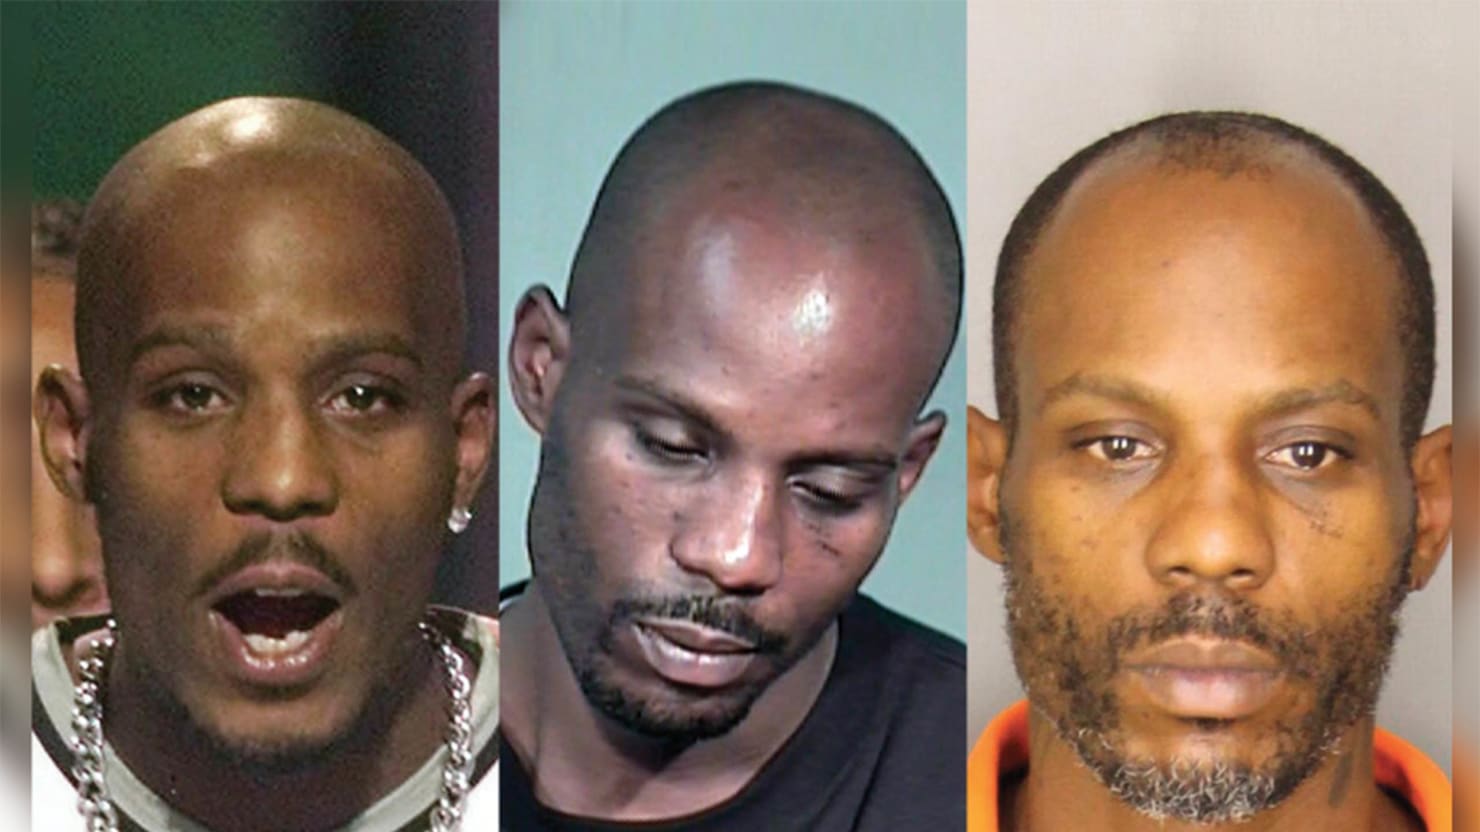 DMX's Downfall: From Hip-Hop King to the Brink of Death